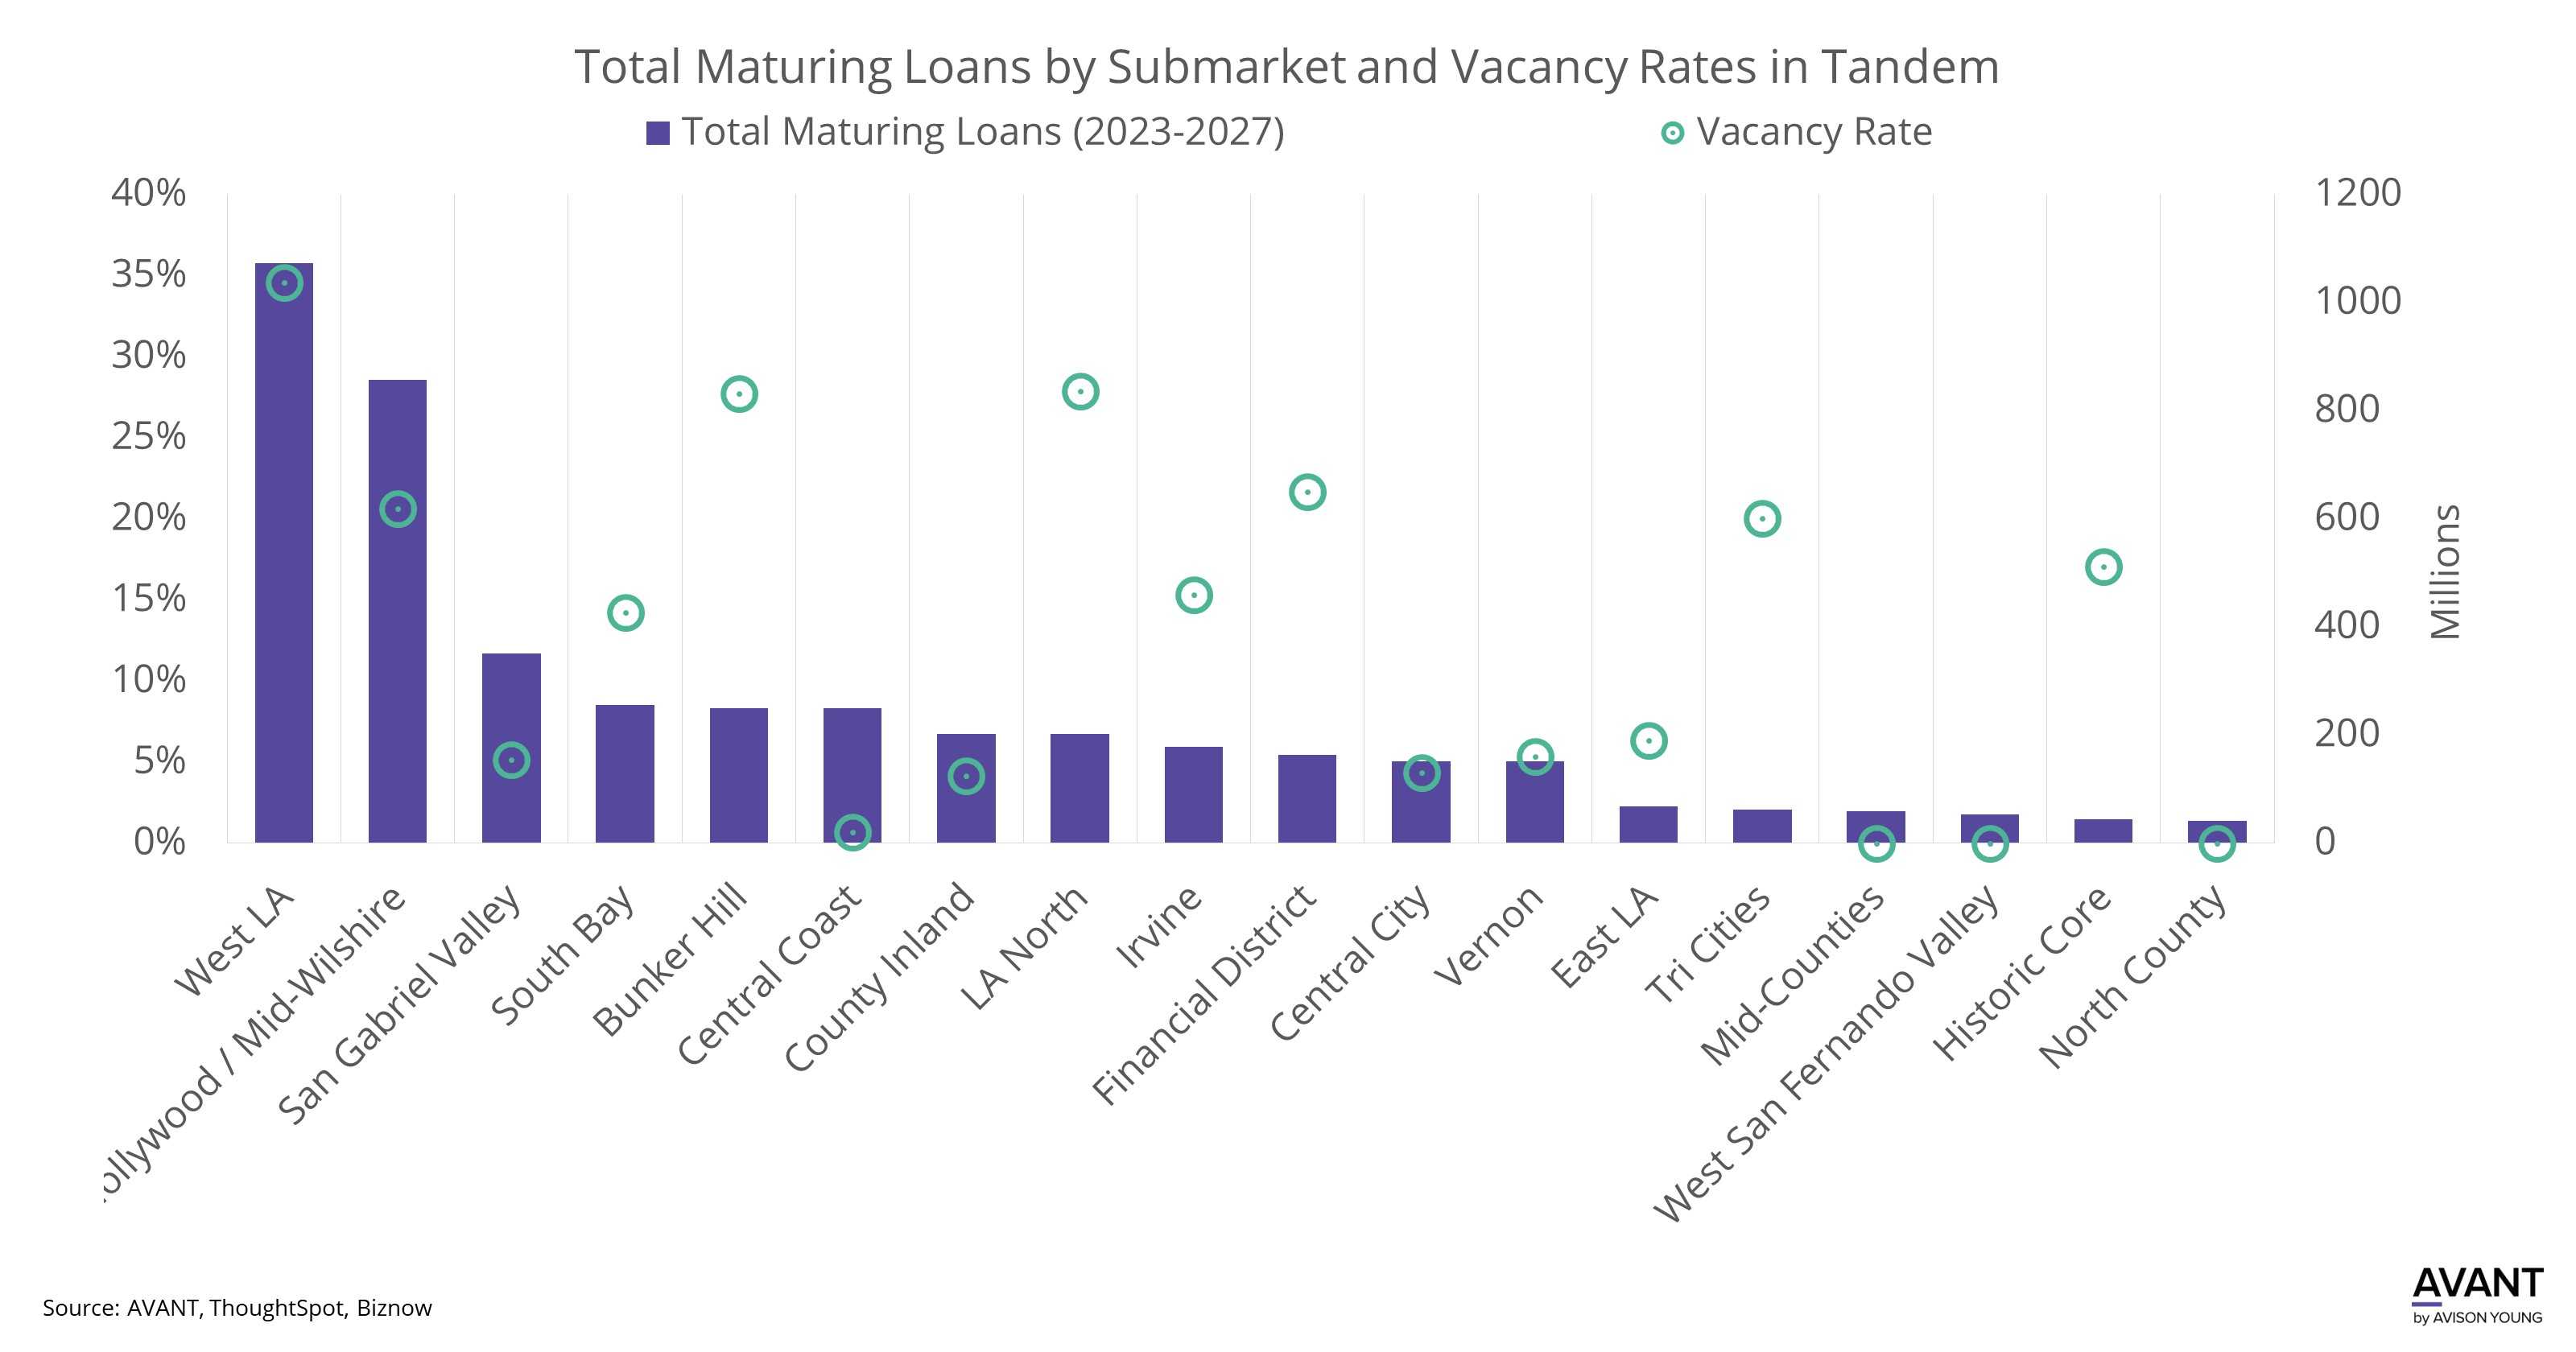 A driving force in the SoCal office submarkets: Record level vacancy rates in conjunction with high impending loan maturities